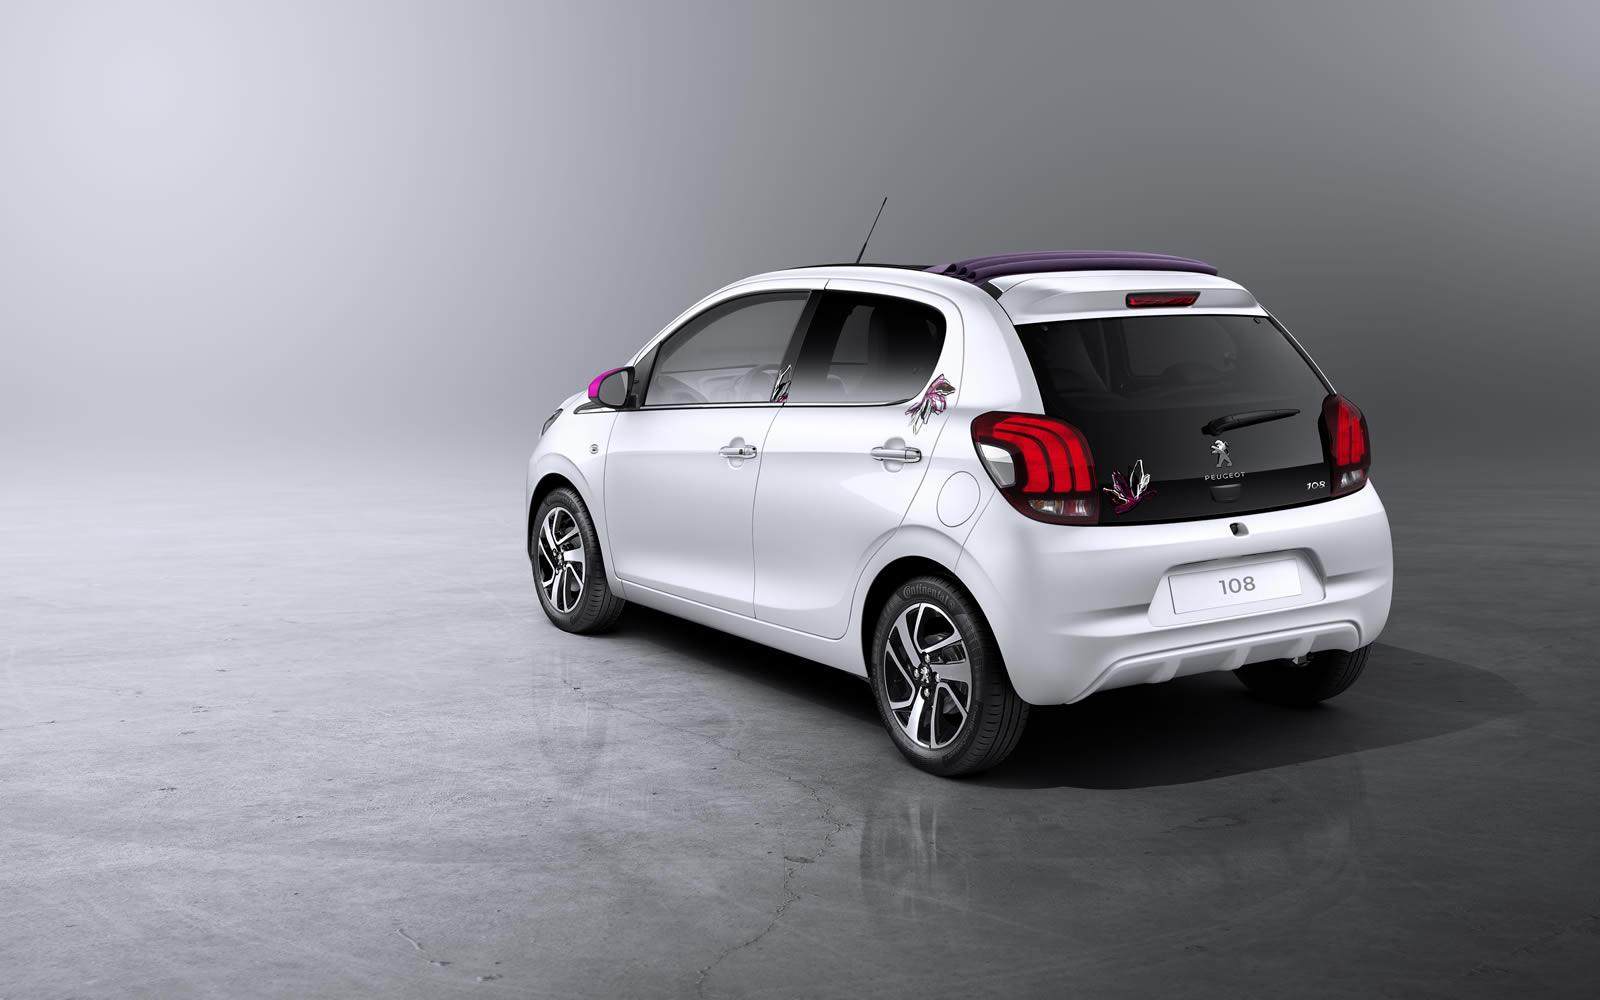 peugeot-reveals-new-108-with-convertible-top-and-luxury-touches-live